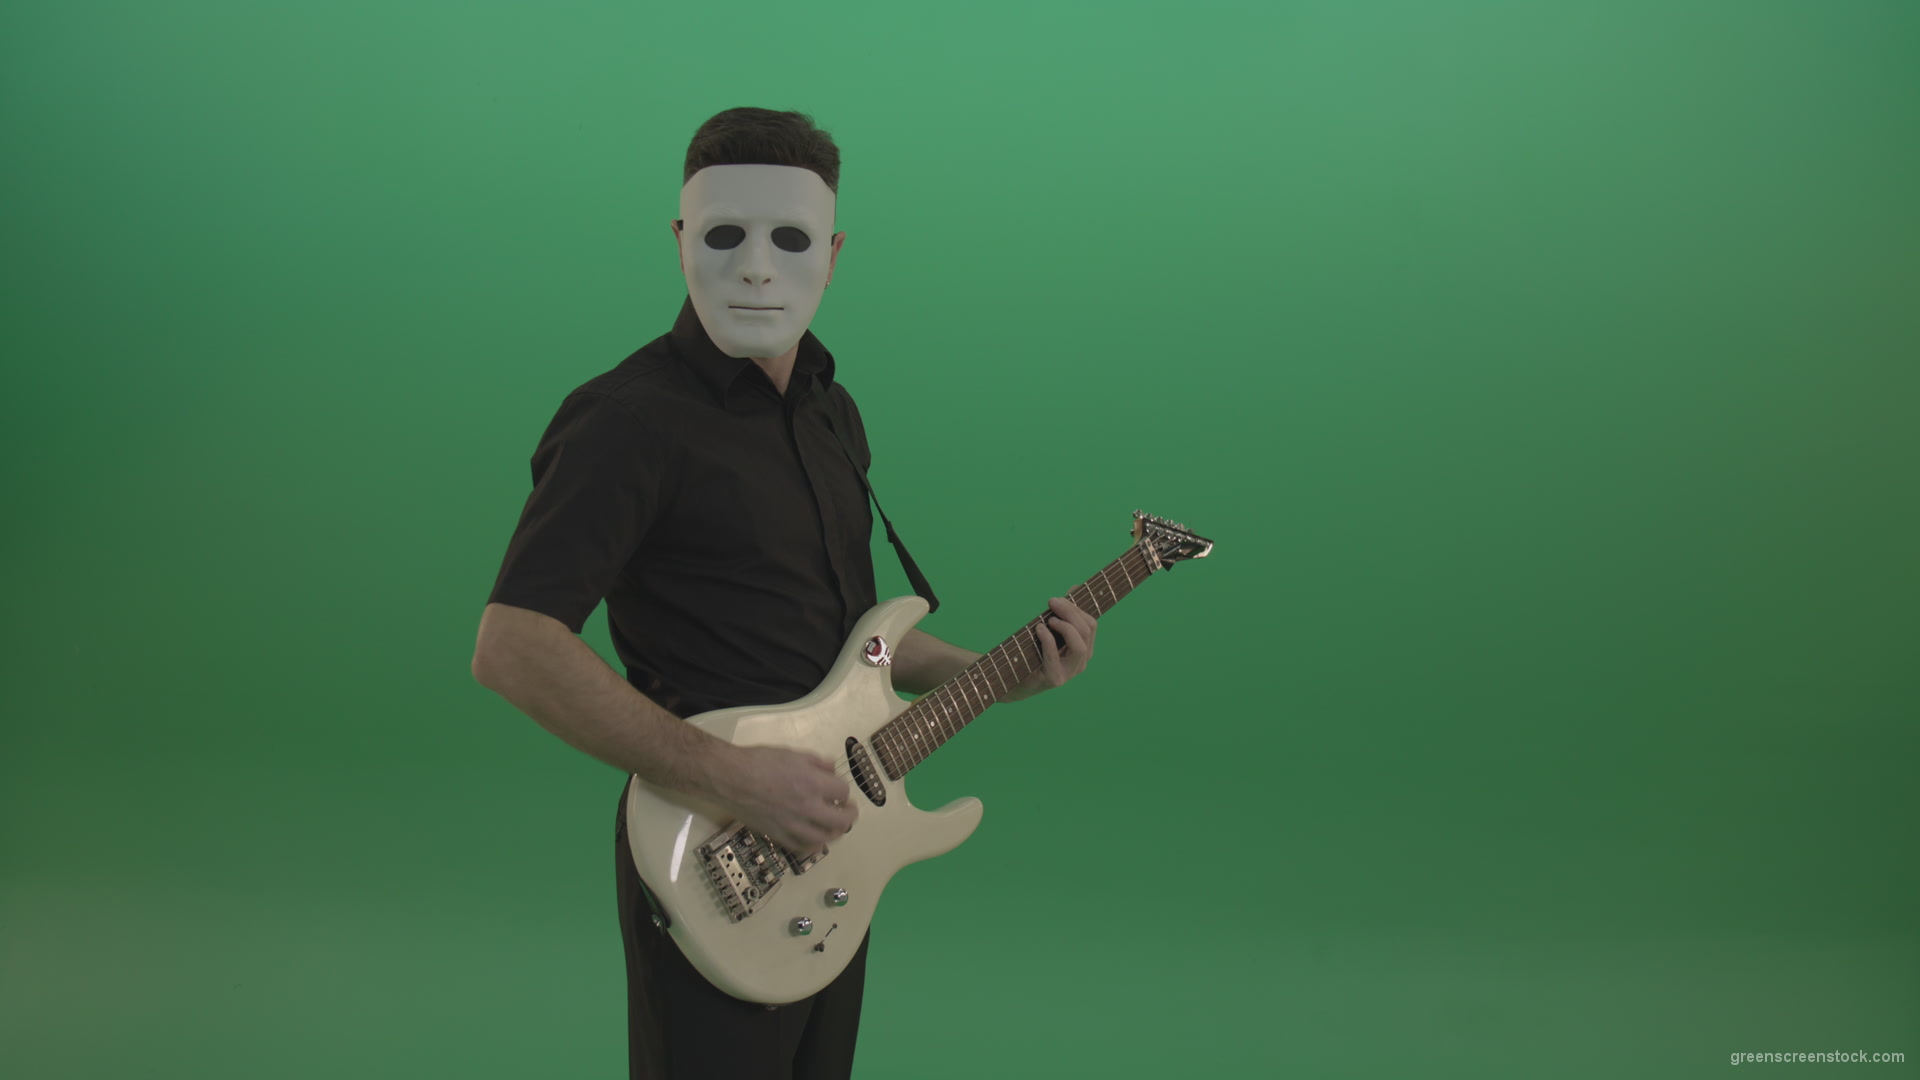 Rock-man-in-white-mask-and-black-wear-playing-guitar-isolated-on-green-screen-in-side-view_002 Green Screen Stock